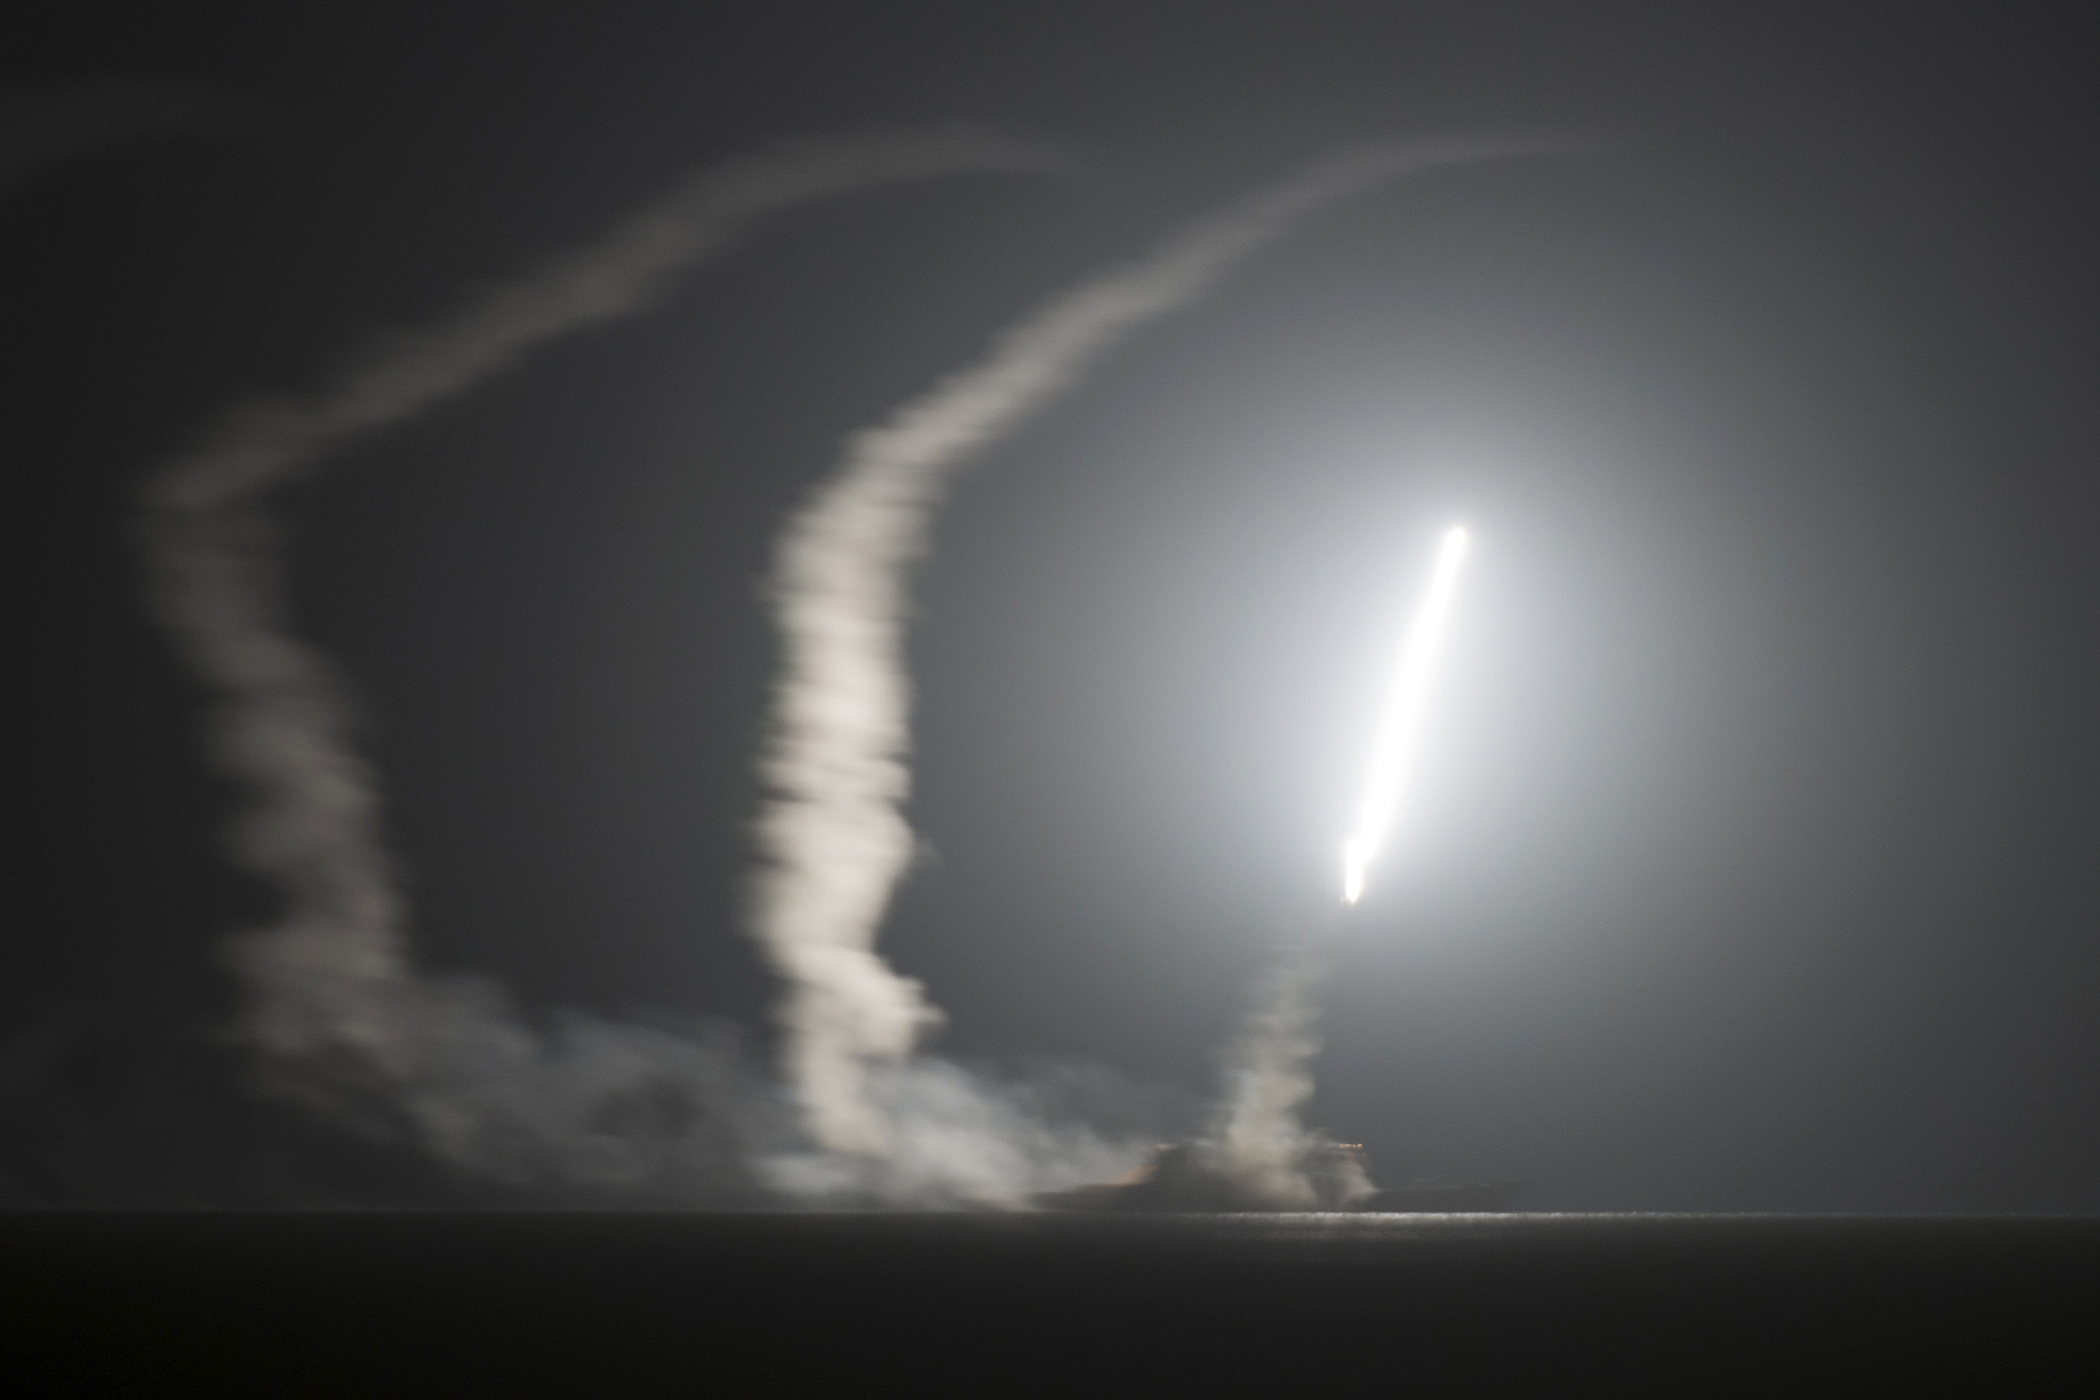 PHOTO: The guided-missile cruiser USS Philippine Sea launches a Tomahawk cruise missile at Islamic State group positions in Syria as seen from the aircraft carrier USS George H.W. Bush on the Arabian Gulf, Sept. 23, 2014.